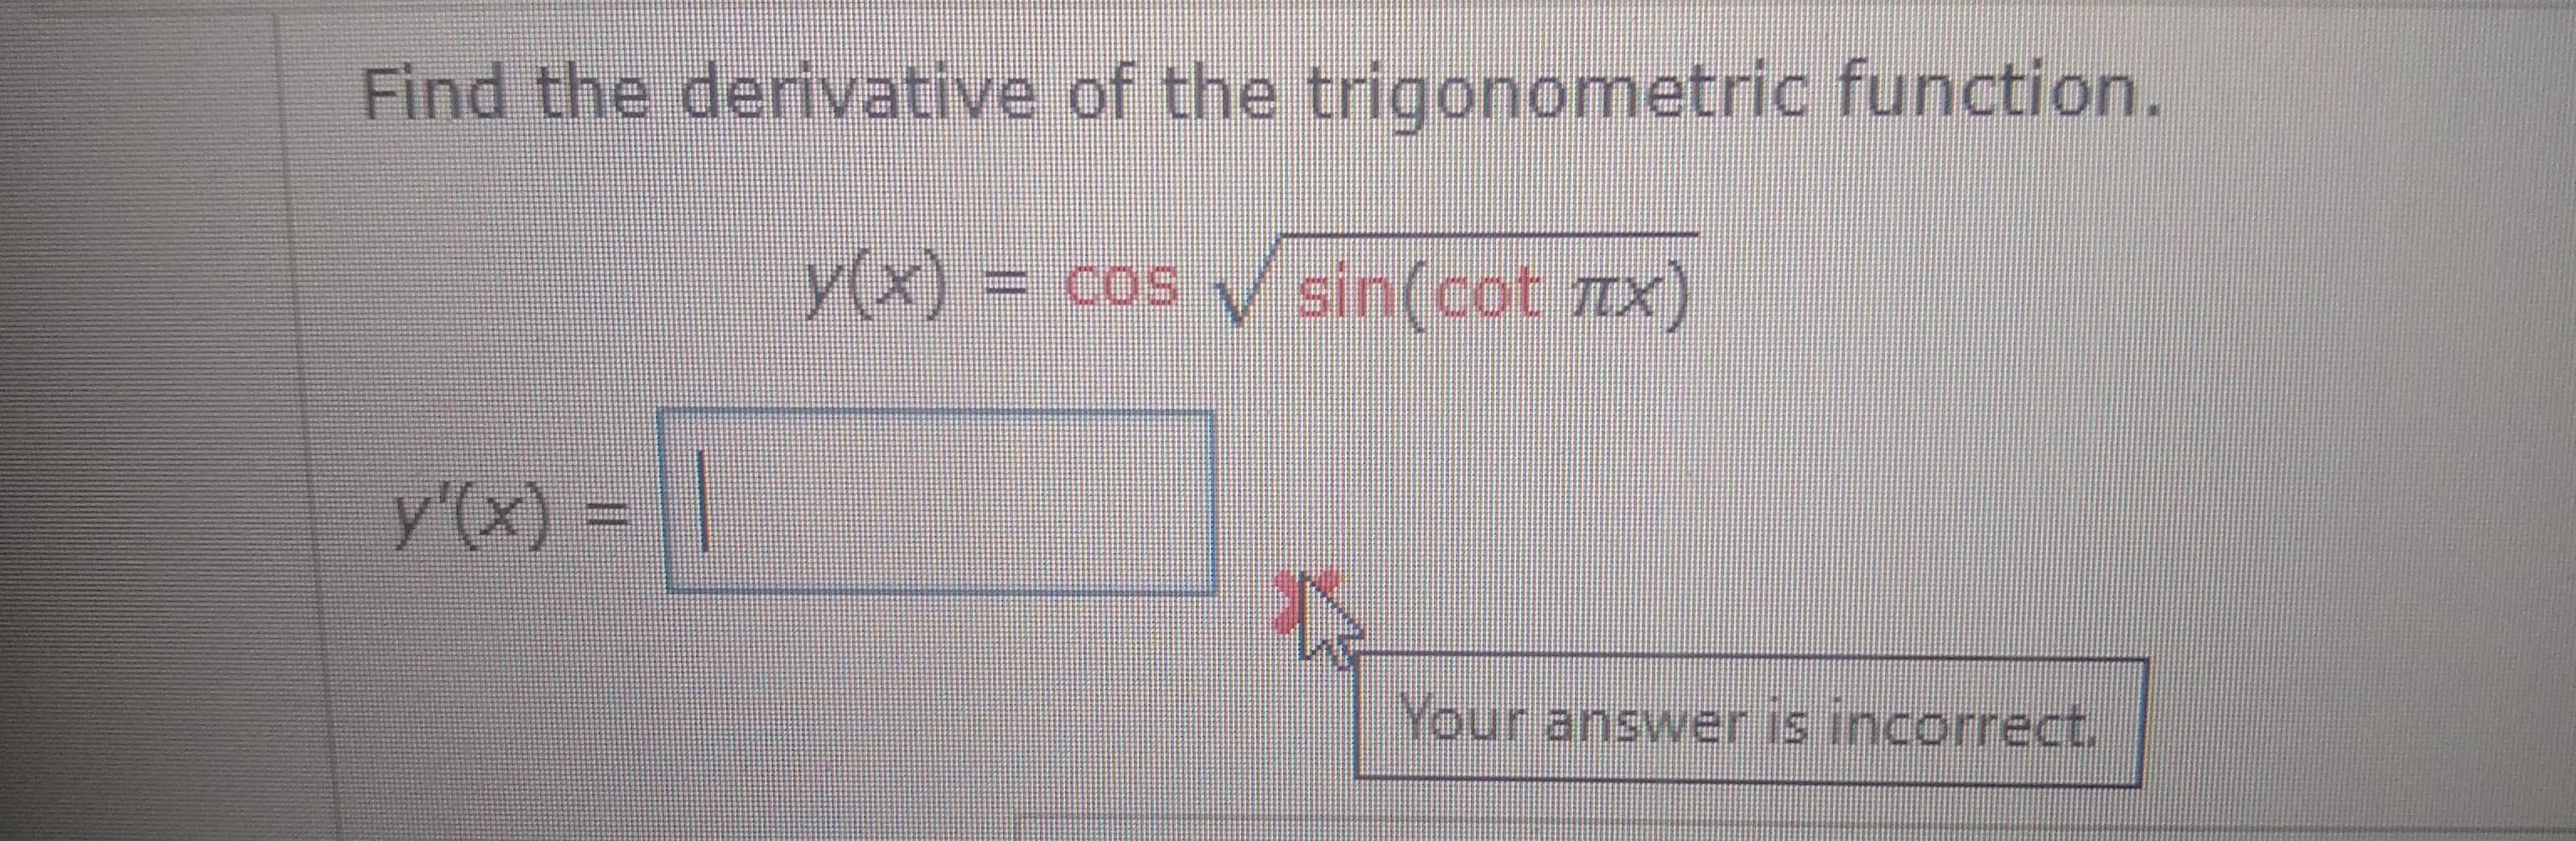 Find the derivative of the trigonometric function.
y(x)%3 cos
cos v sin(cot TX)
